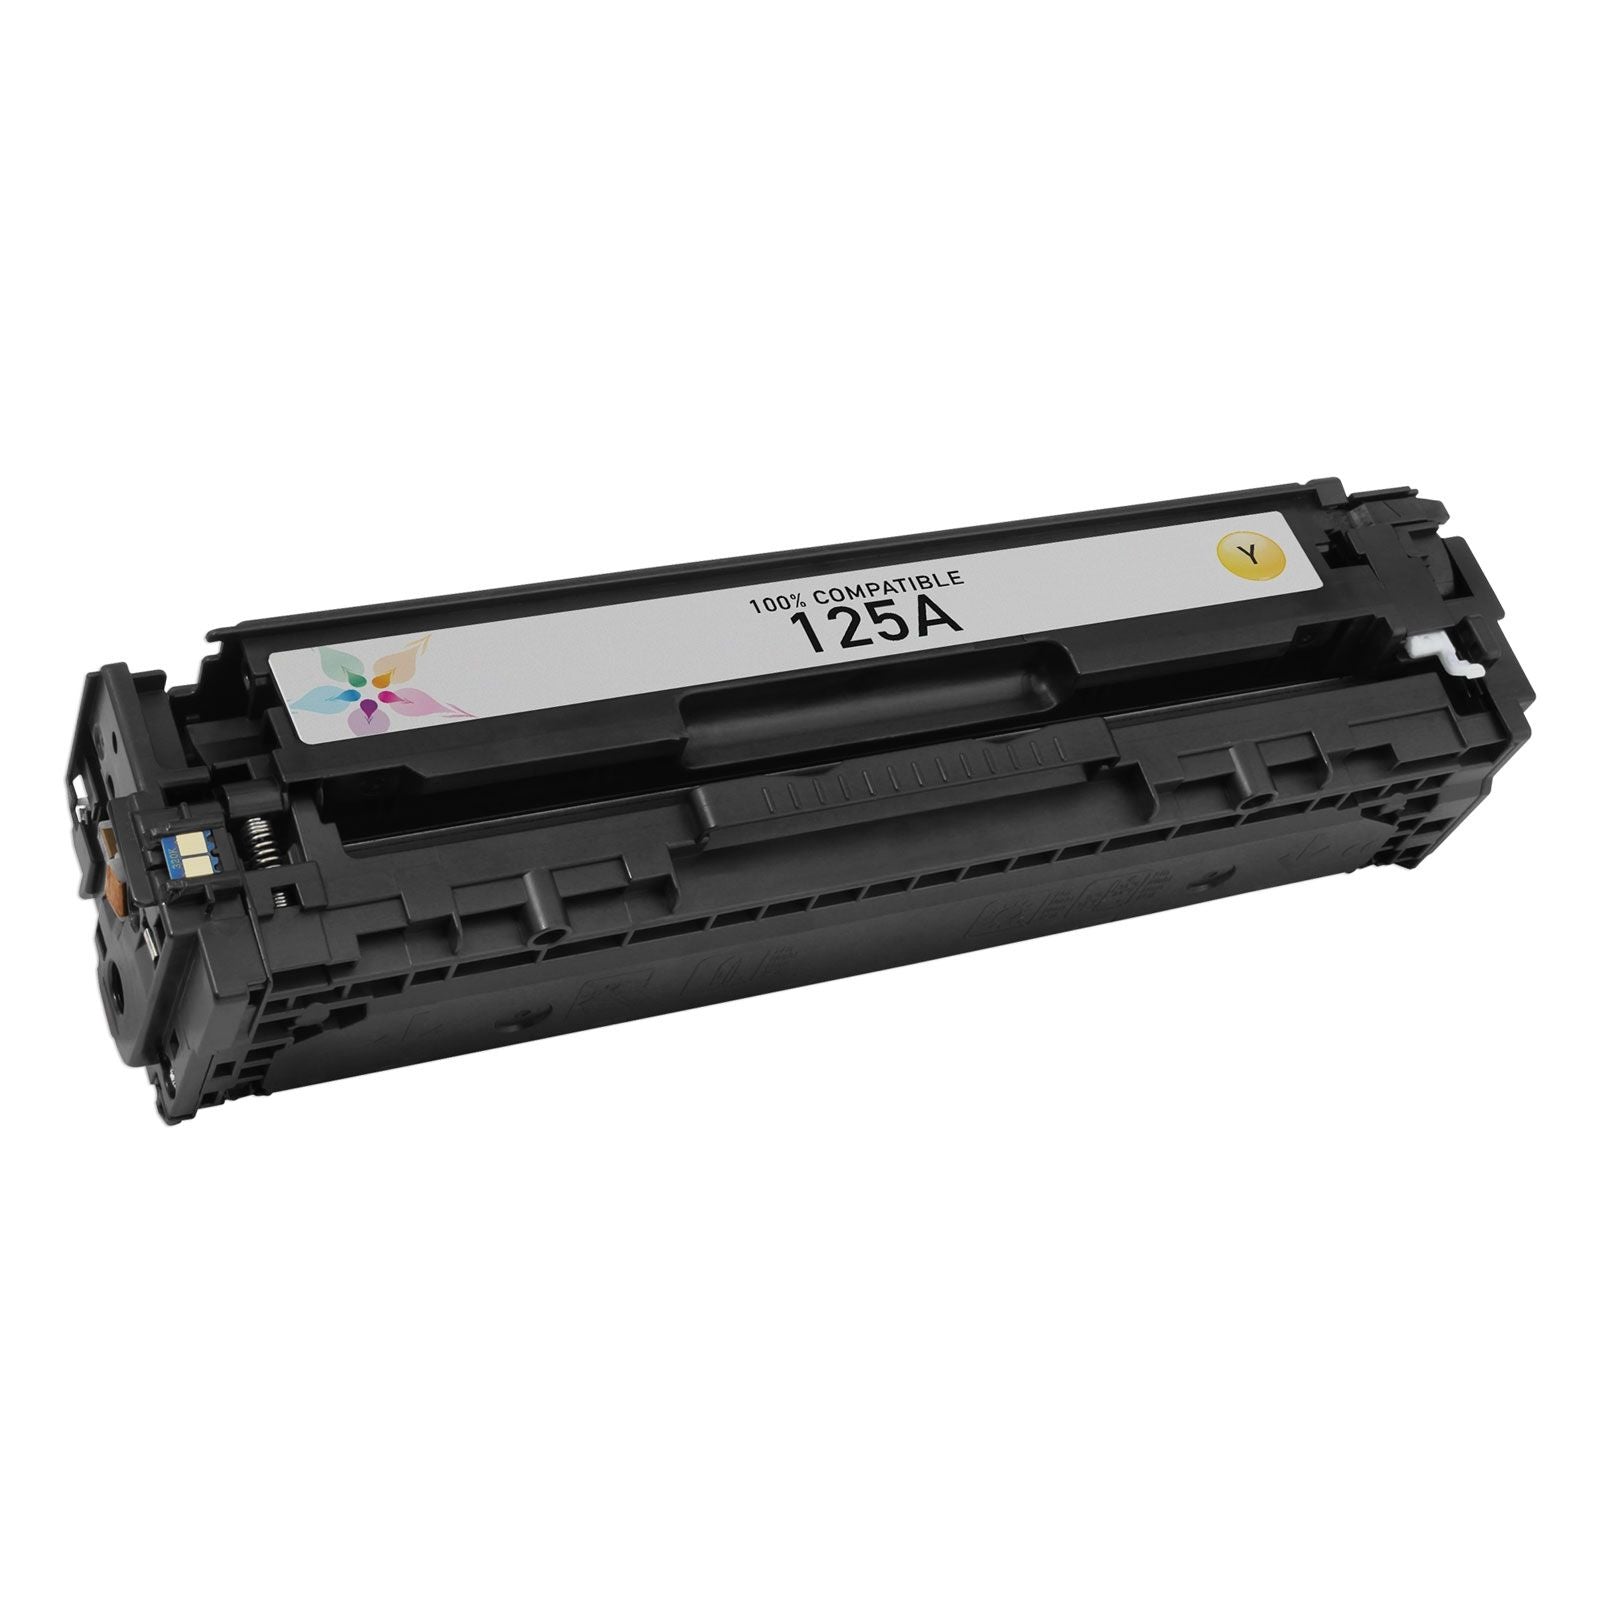 IMPERIAL BRAND Compatible toner cartridge for HP 125A YELLOW LASER TONER 1400 PAGES